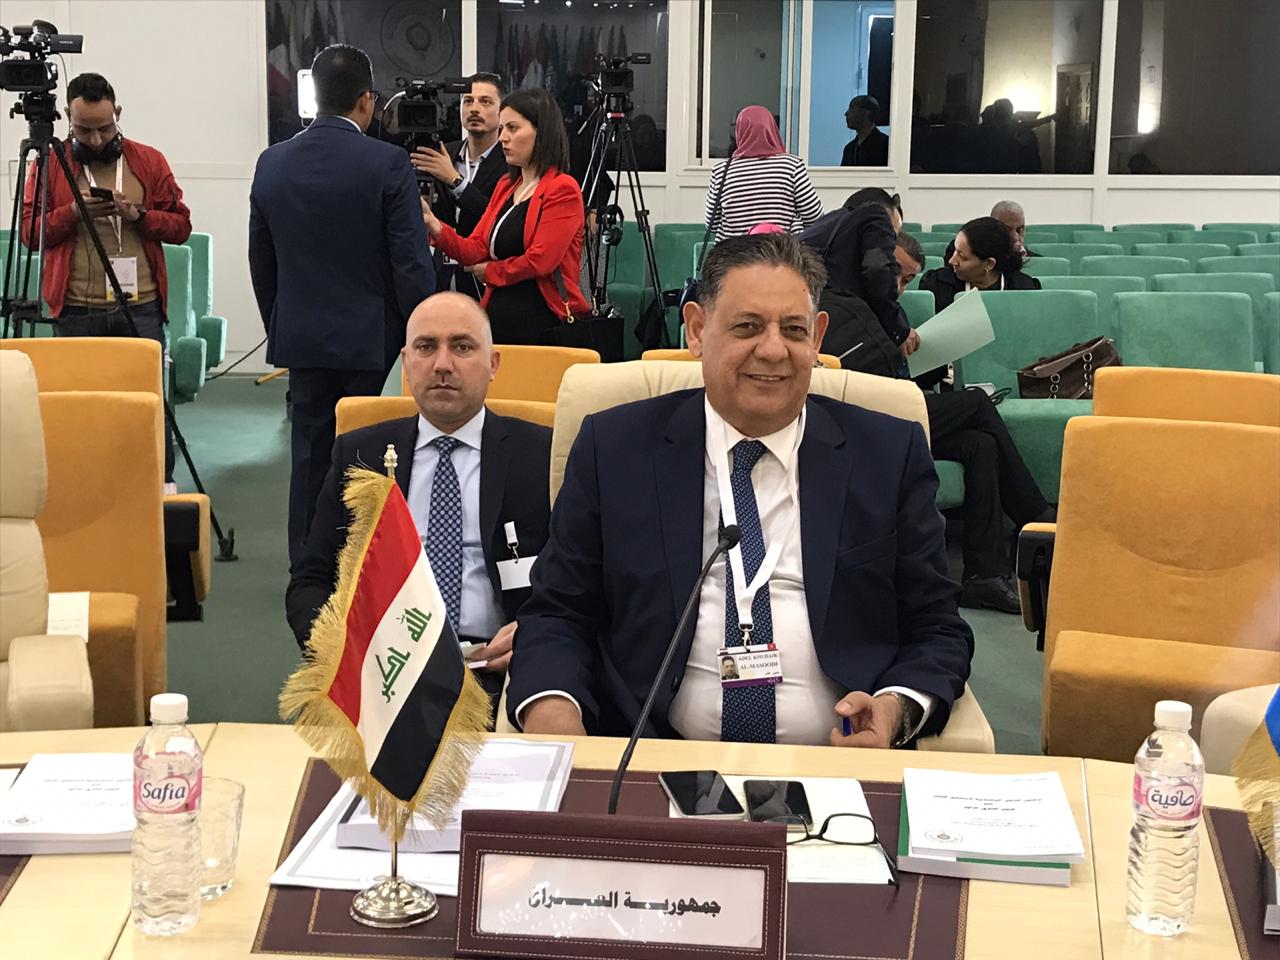 Foreign Minister of the morning: the President of the Republic will represent Iraq at the Arab summit 112632019_fdc1d9f2-10d1-4d2b-a9cf-388a0cfa7938